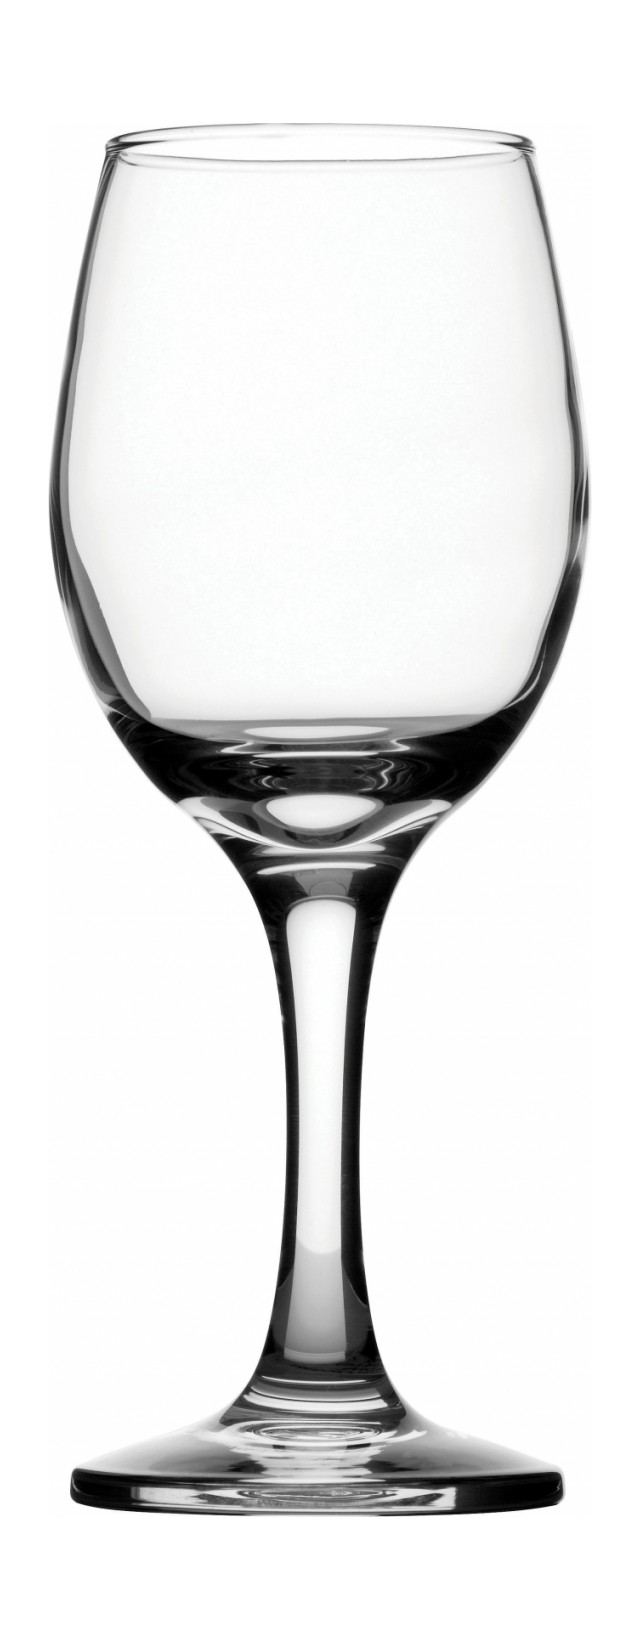 clipart glass of wine - photo #36